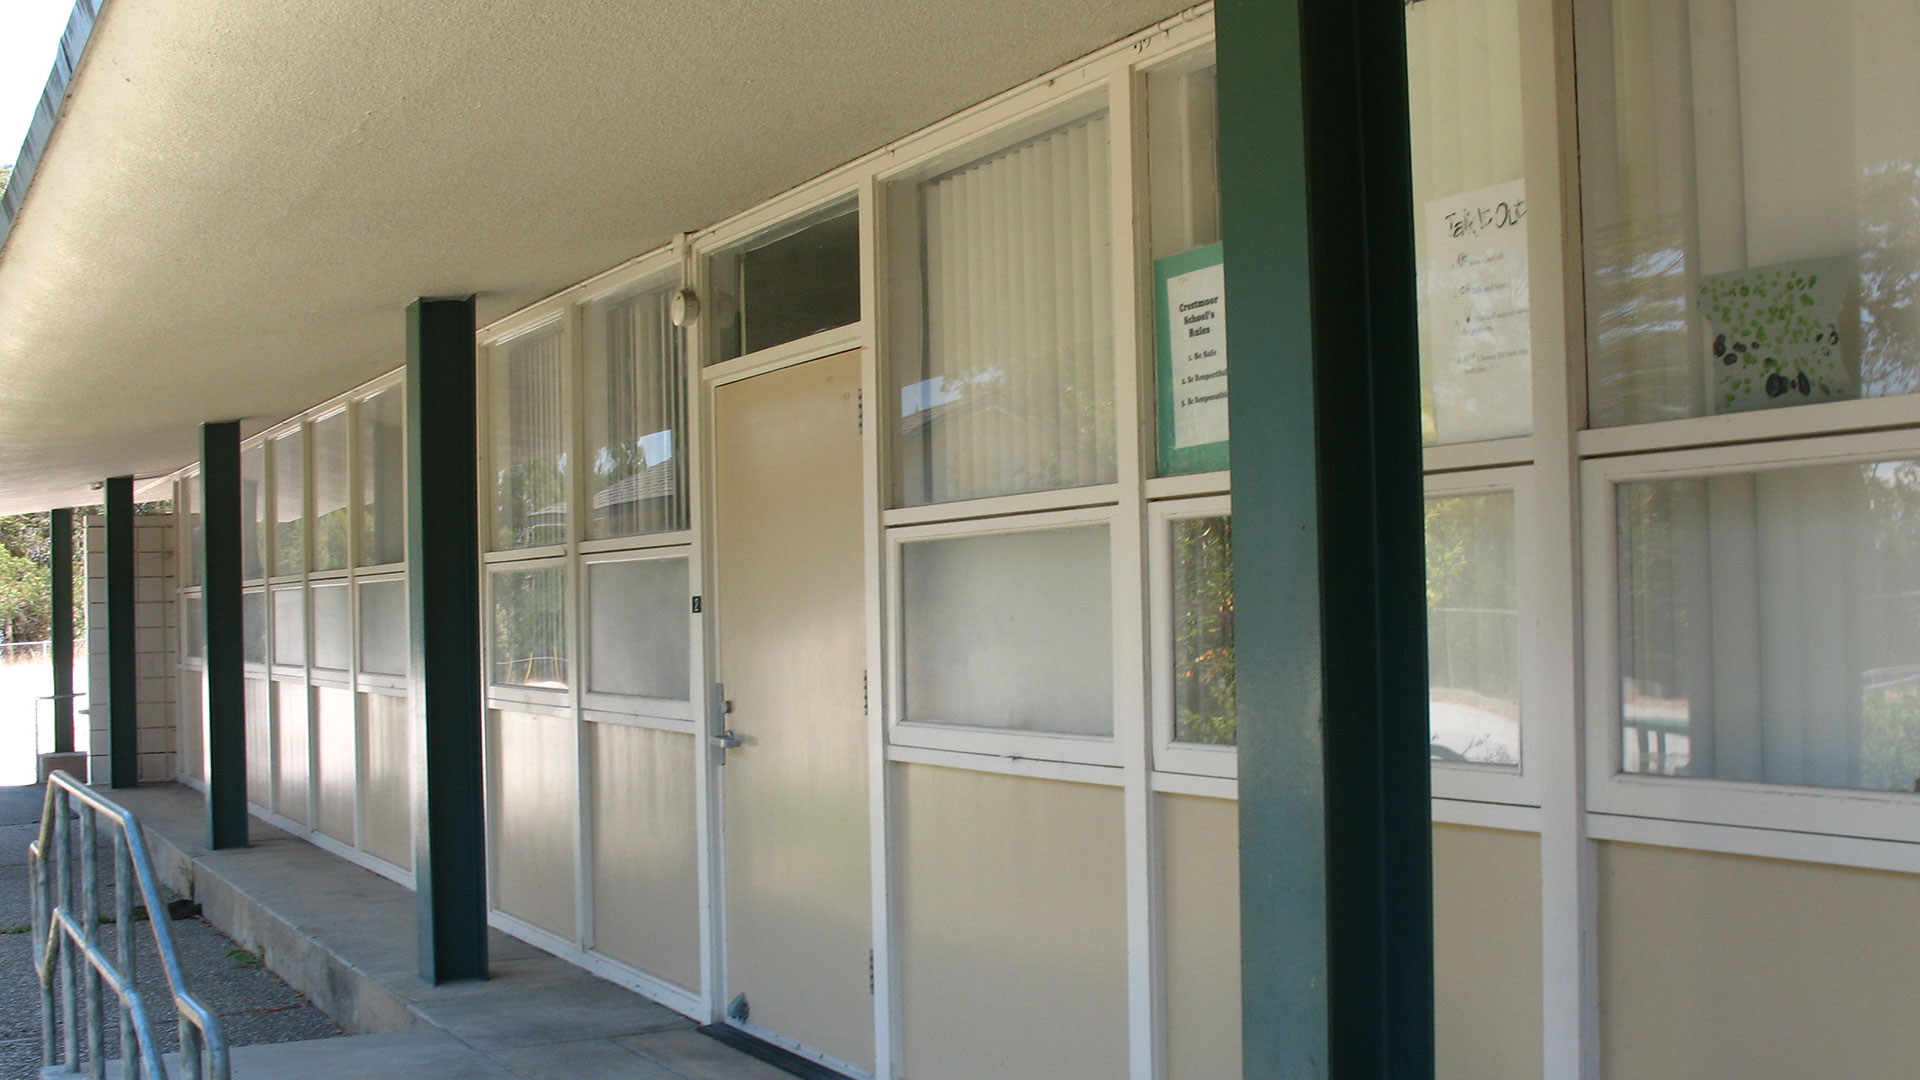 School building with beige walls and green trim, and windows.